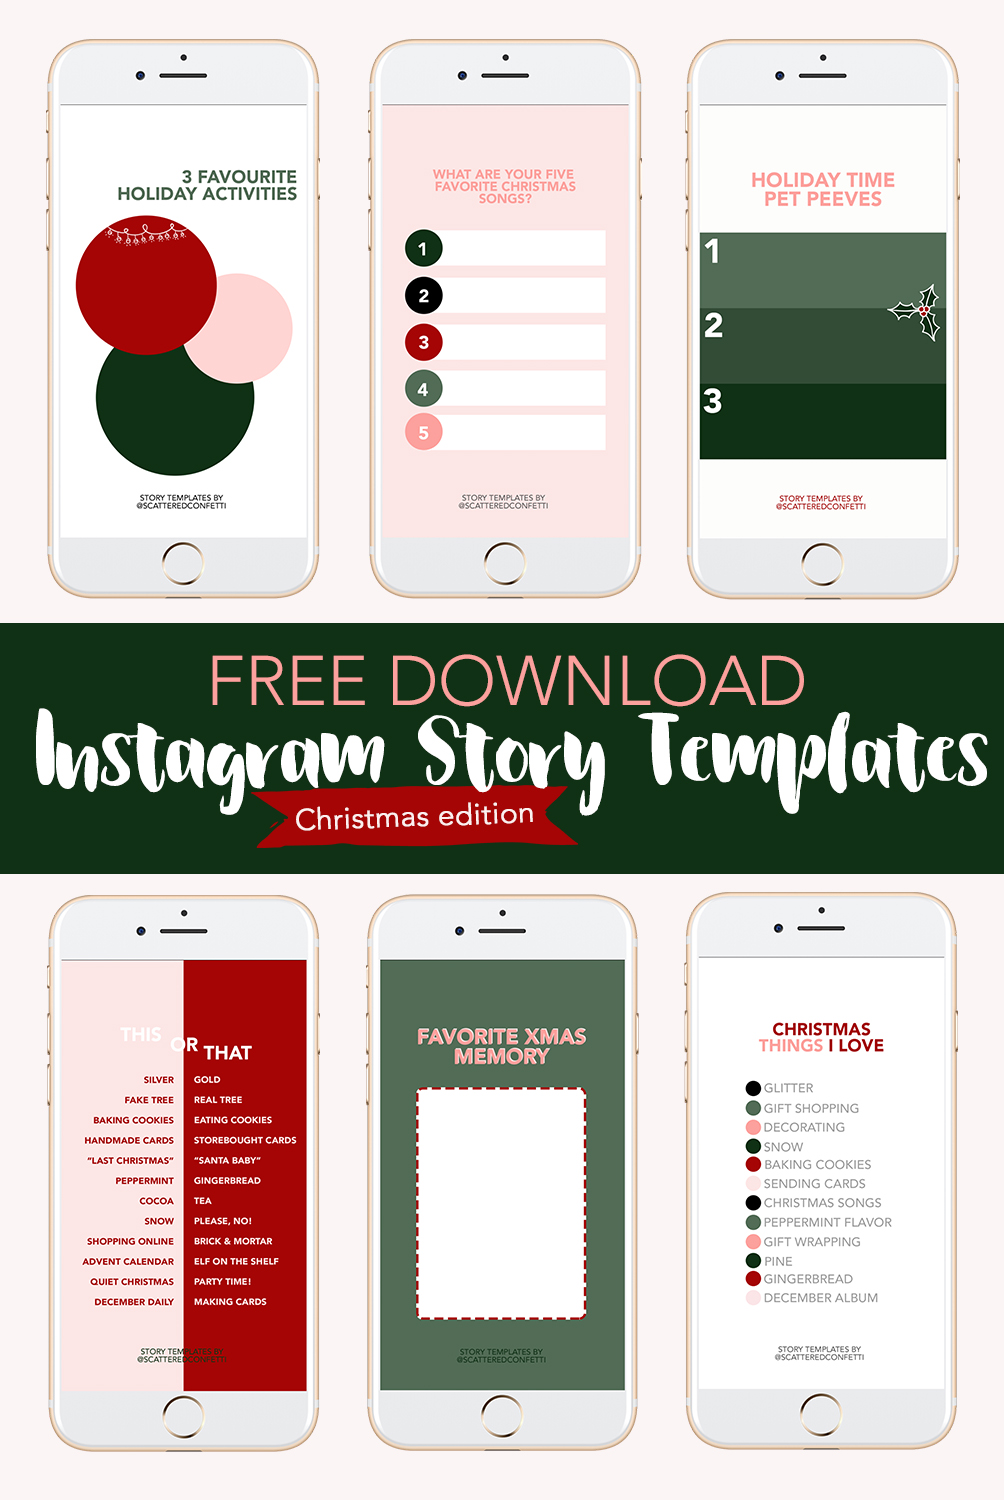 Instagram Story Templates - Christmas Edition. Free Download by ScatteredConfetti.